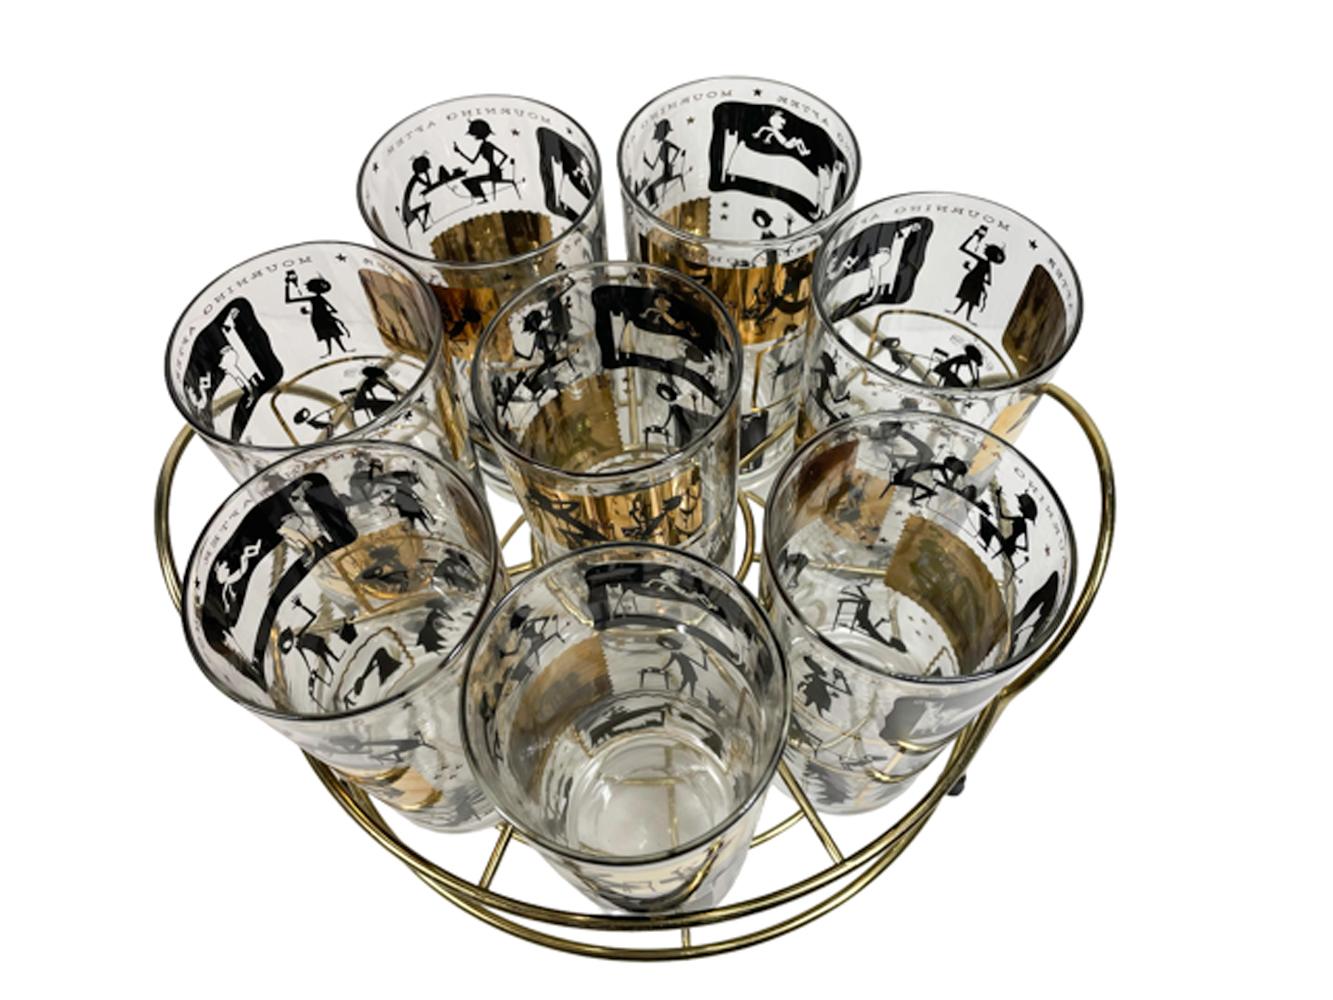 Set of eight Cera Glass highball glasses in a circular gold-tone caddy. Each of the glasses is decorated in 22 karat gold and black enamel with 3 rows of four scenes depicting people in various morning activities, suffering the effects of too much